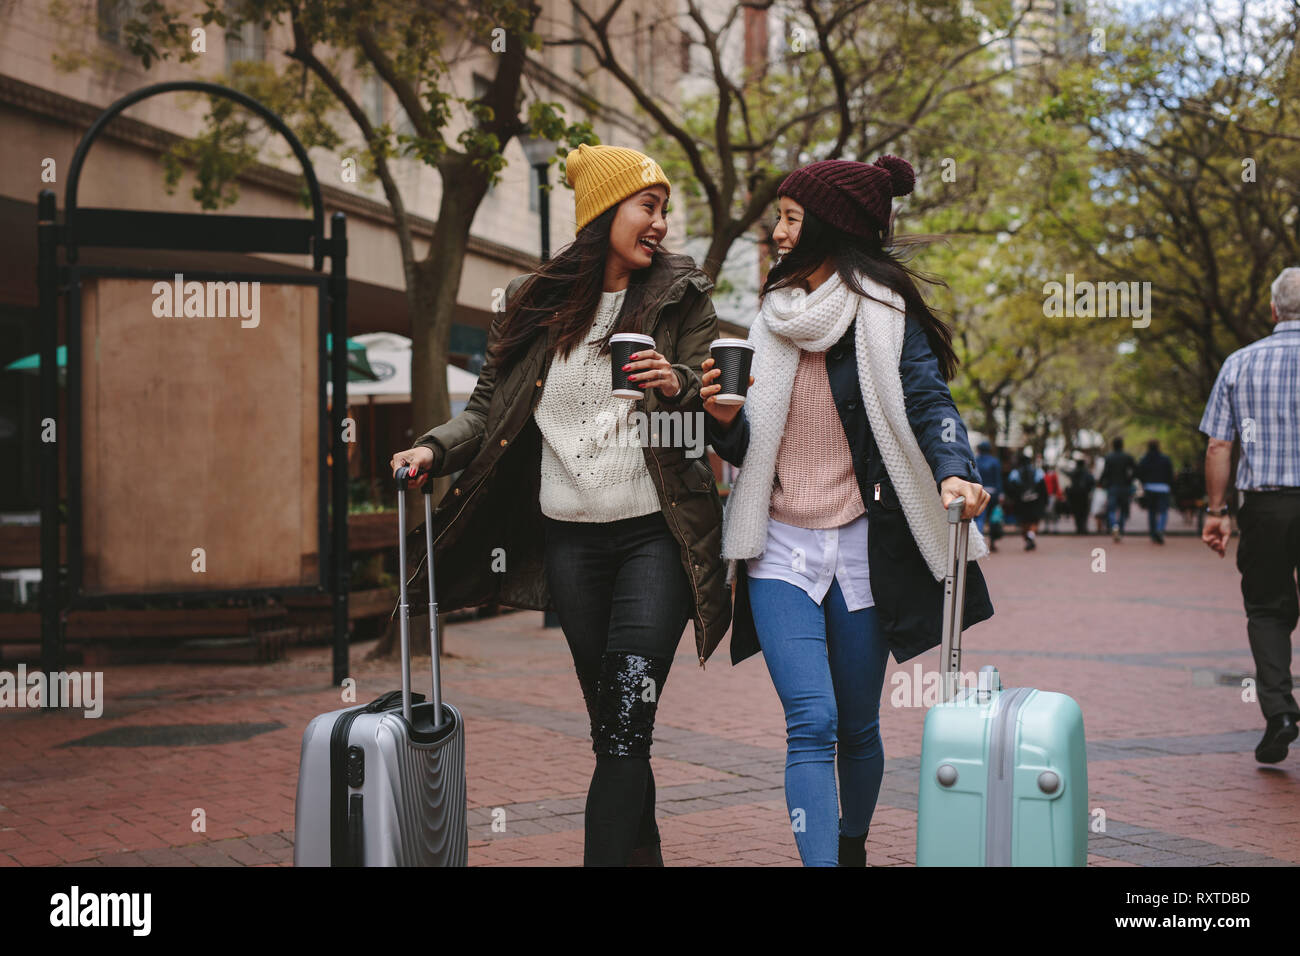 Two smiling woman tourists walking around the city drinking coffee. Two asian women walking on street with luggage bags enjoying coffee. Stock Photo